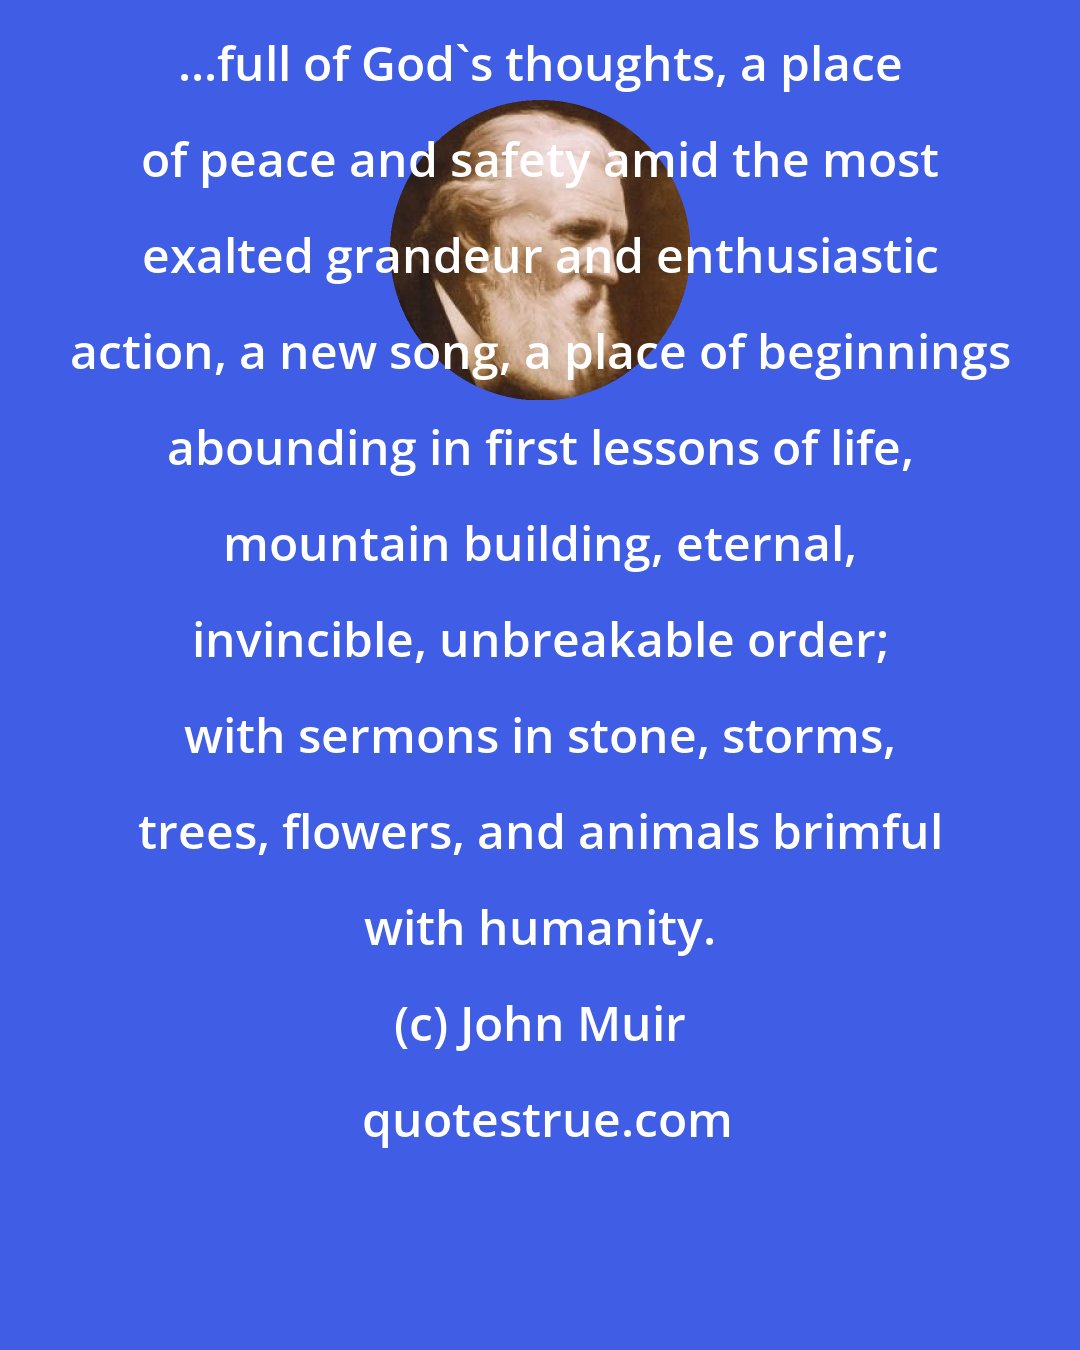 John Muir: ...full of God's thoughts, a place of peace and safety amid the most exalted grandeur and enthusiastic action, a new song, a place of beginnings abounding in first lessons of life, mountain building, eternal, invincible, unbreakable order; with sermons in stone, storms, trees, flowers, and animals brimful with humanity.